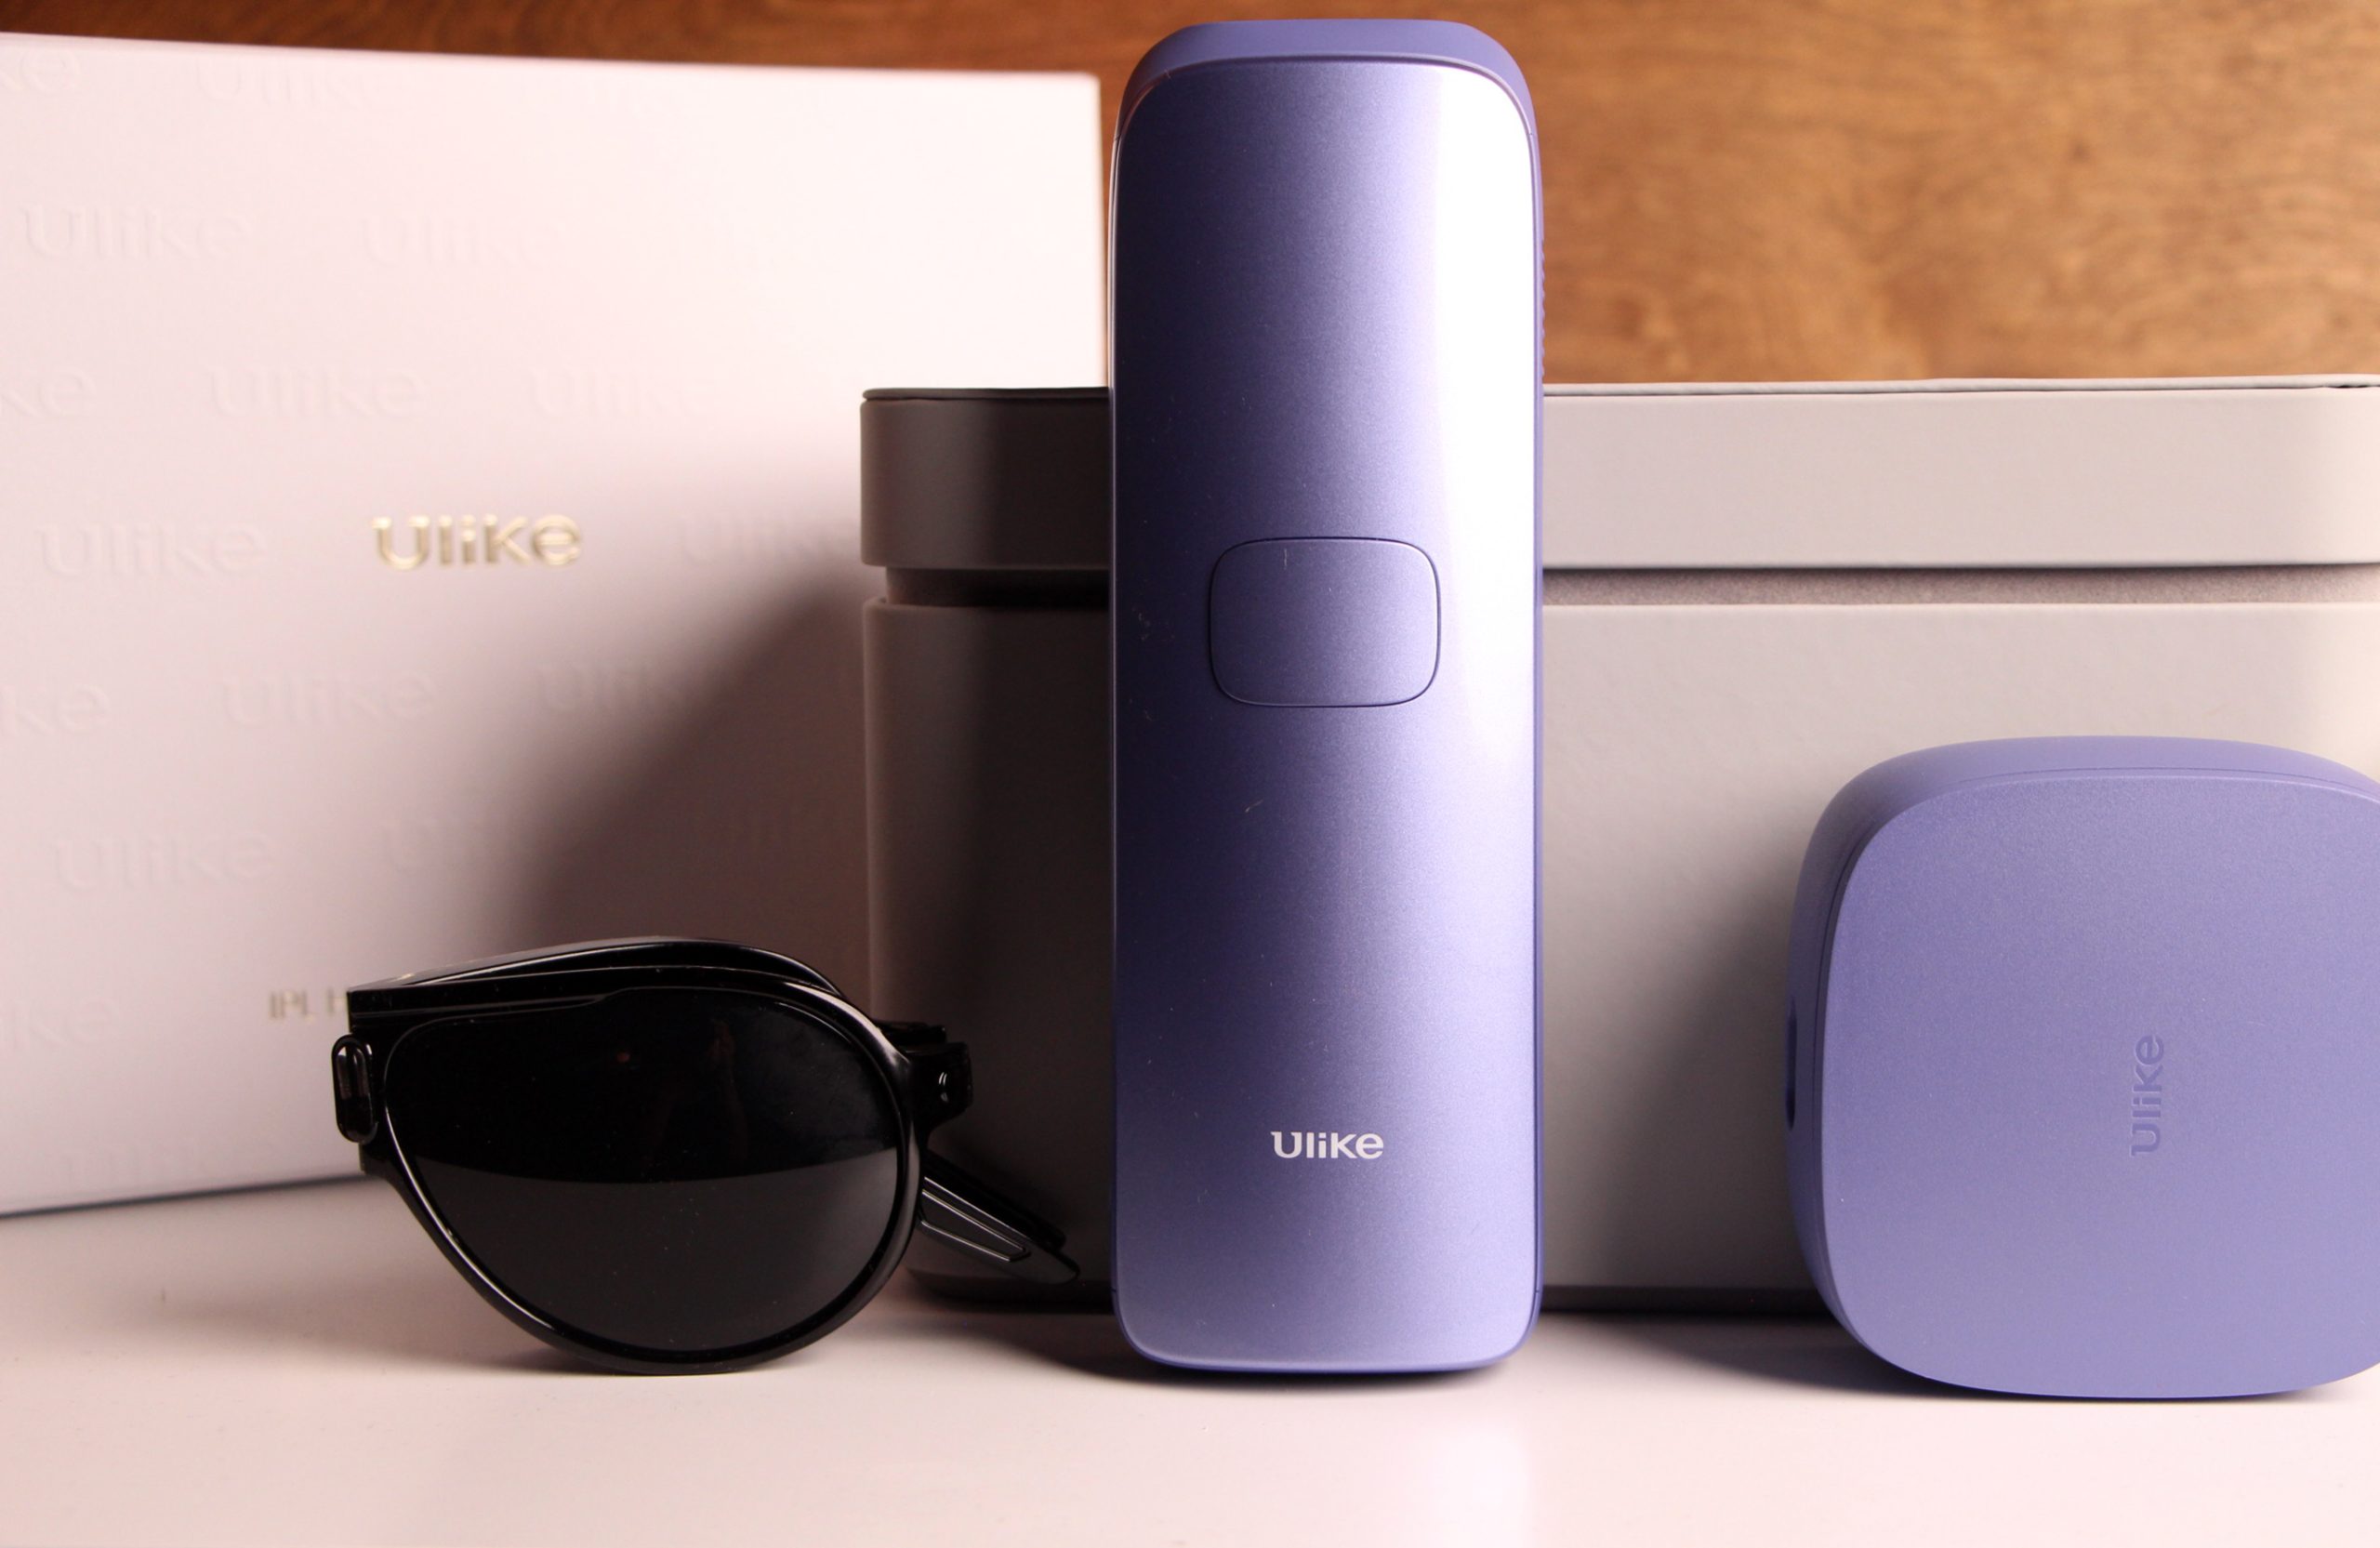 Permanent Hair Reduction Begins at Home: My Review of the ULike Air 3 IPL Device